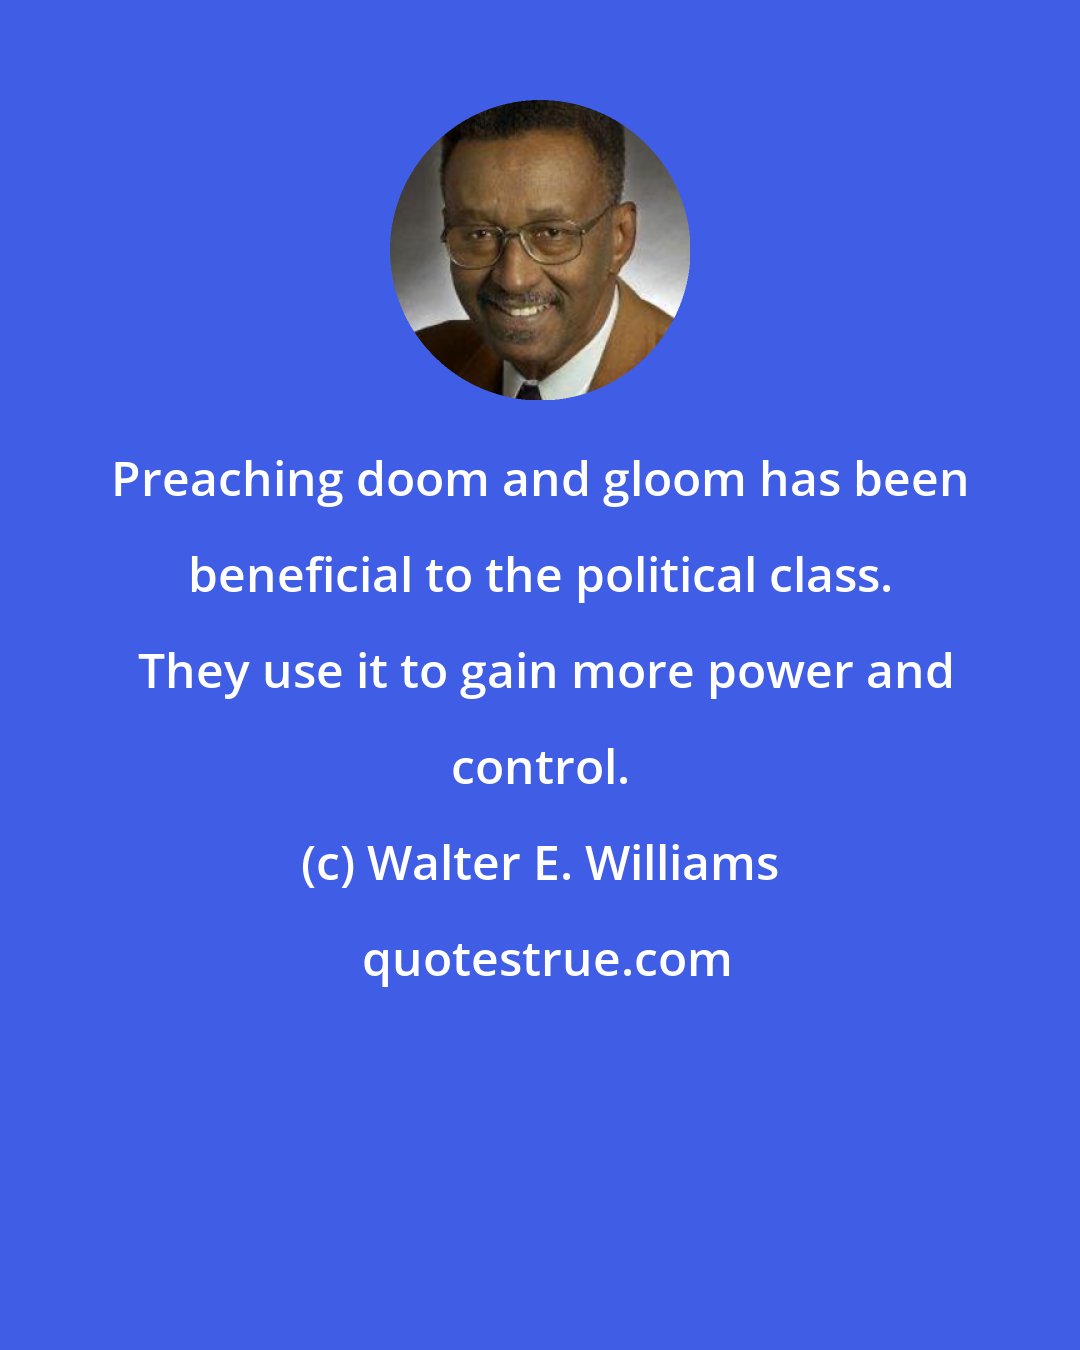 Walter E. Williams: Preaching doom and gloom has been beneficial to the political class.  They use it to gain more power and control.